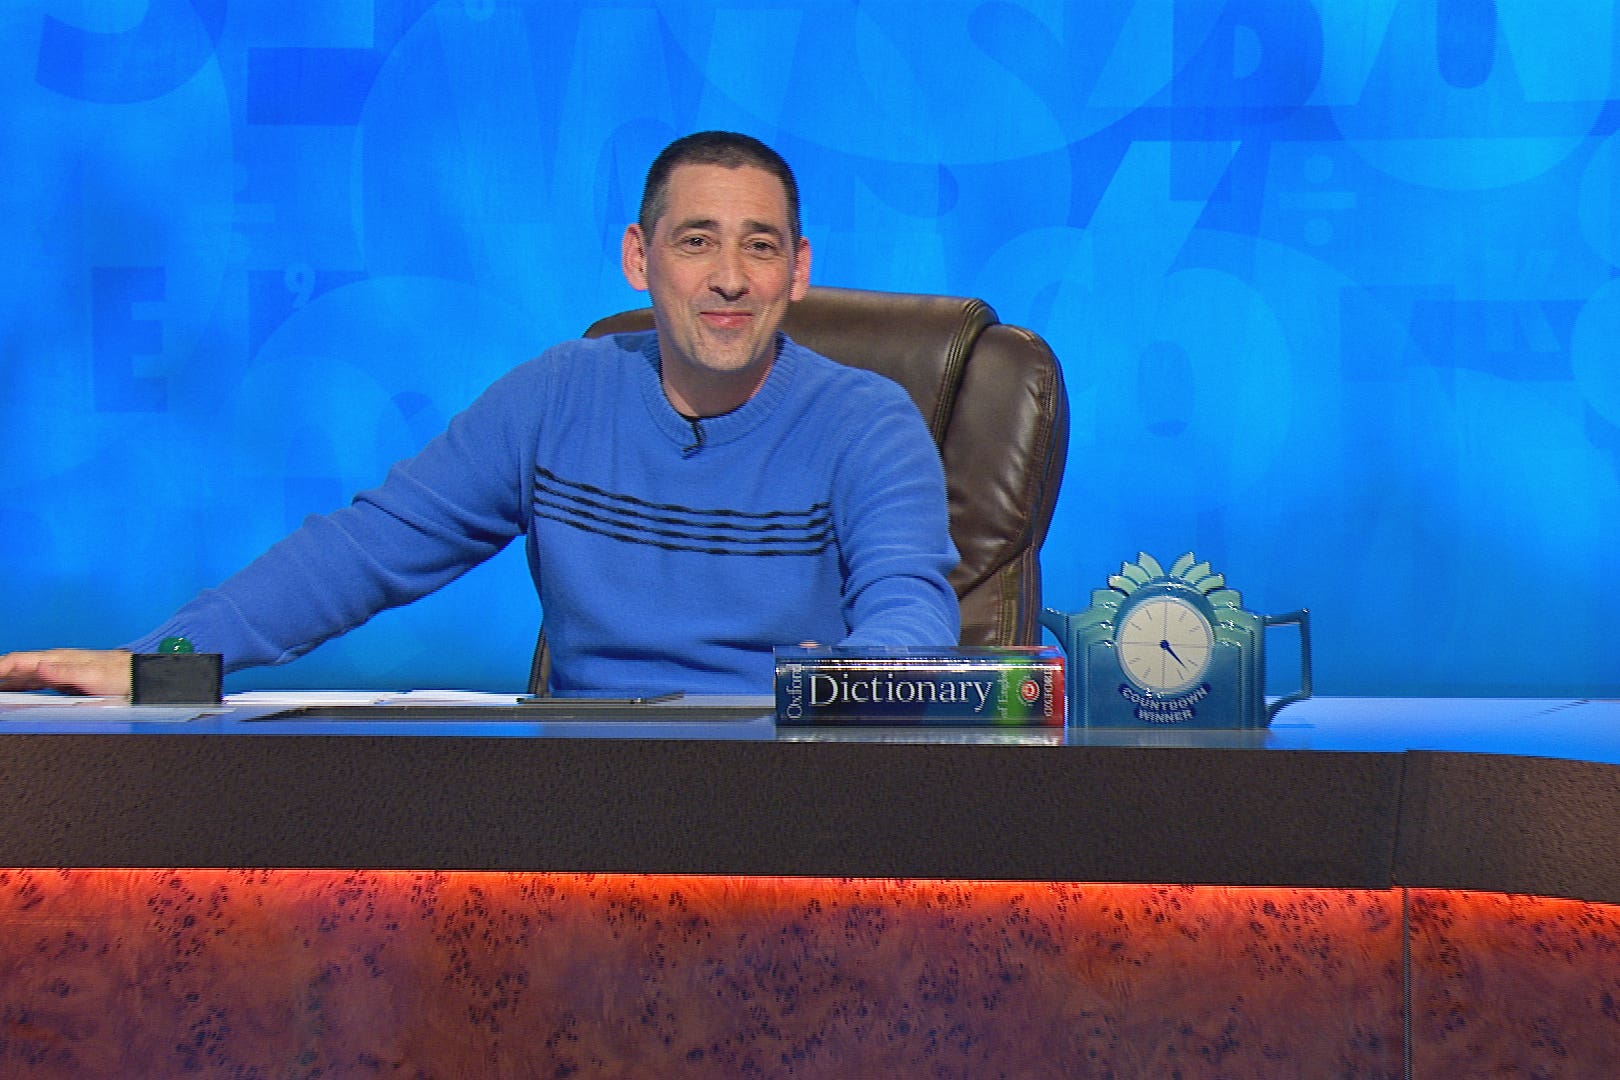 Colin Murray’s role as Countdown presenter has been made permanent (Channel 4/PA)